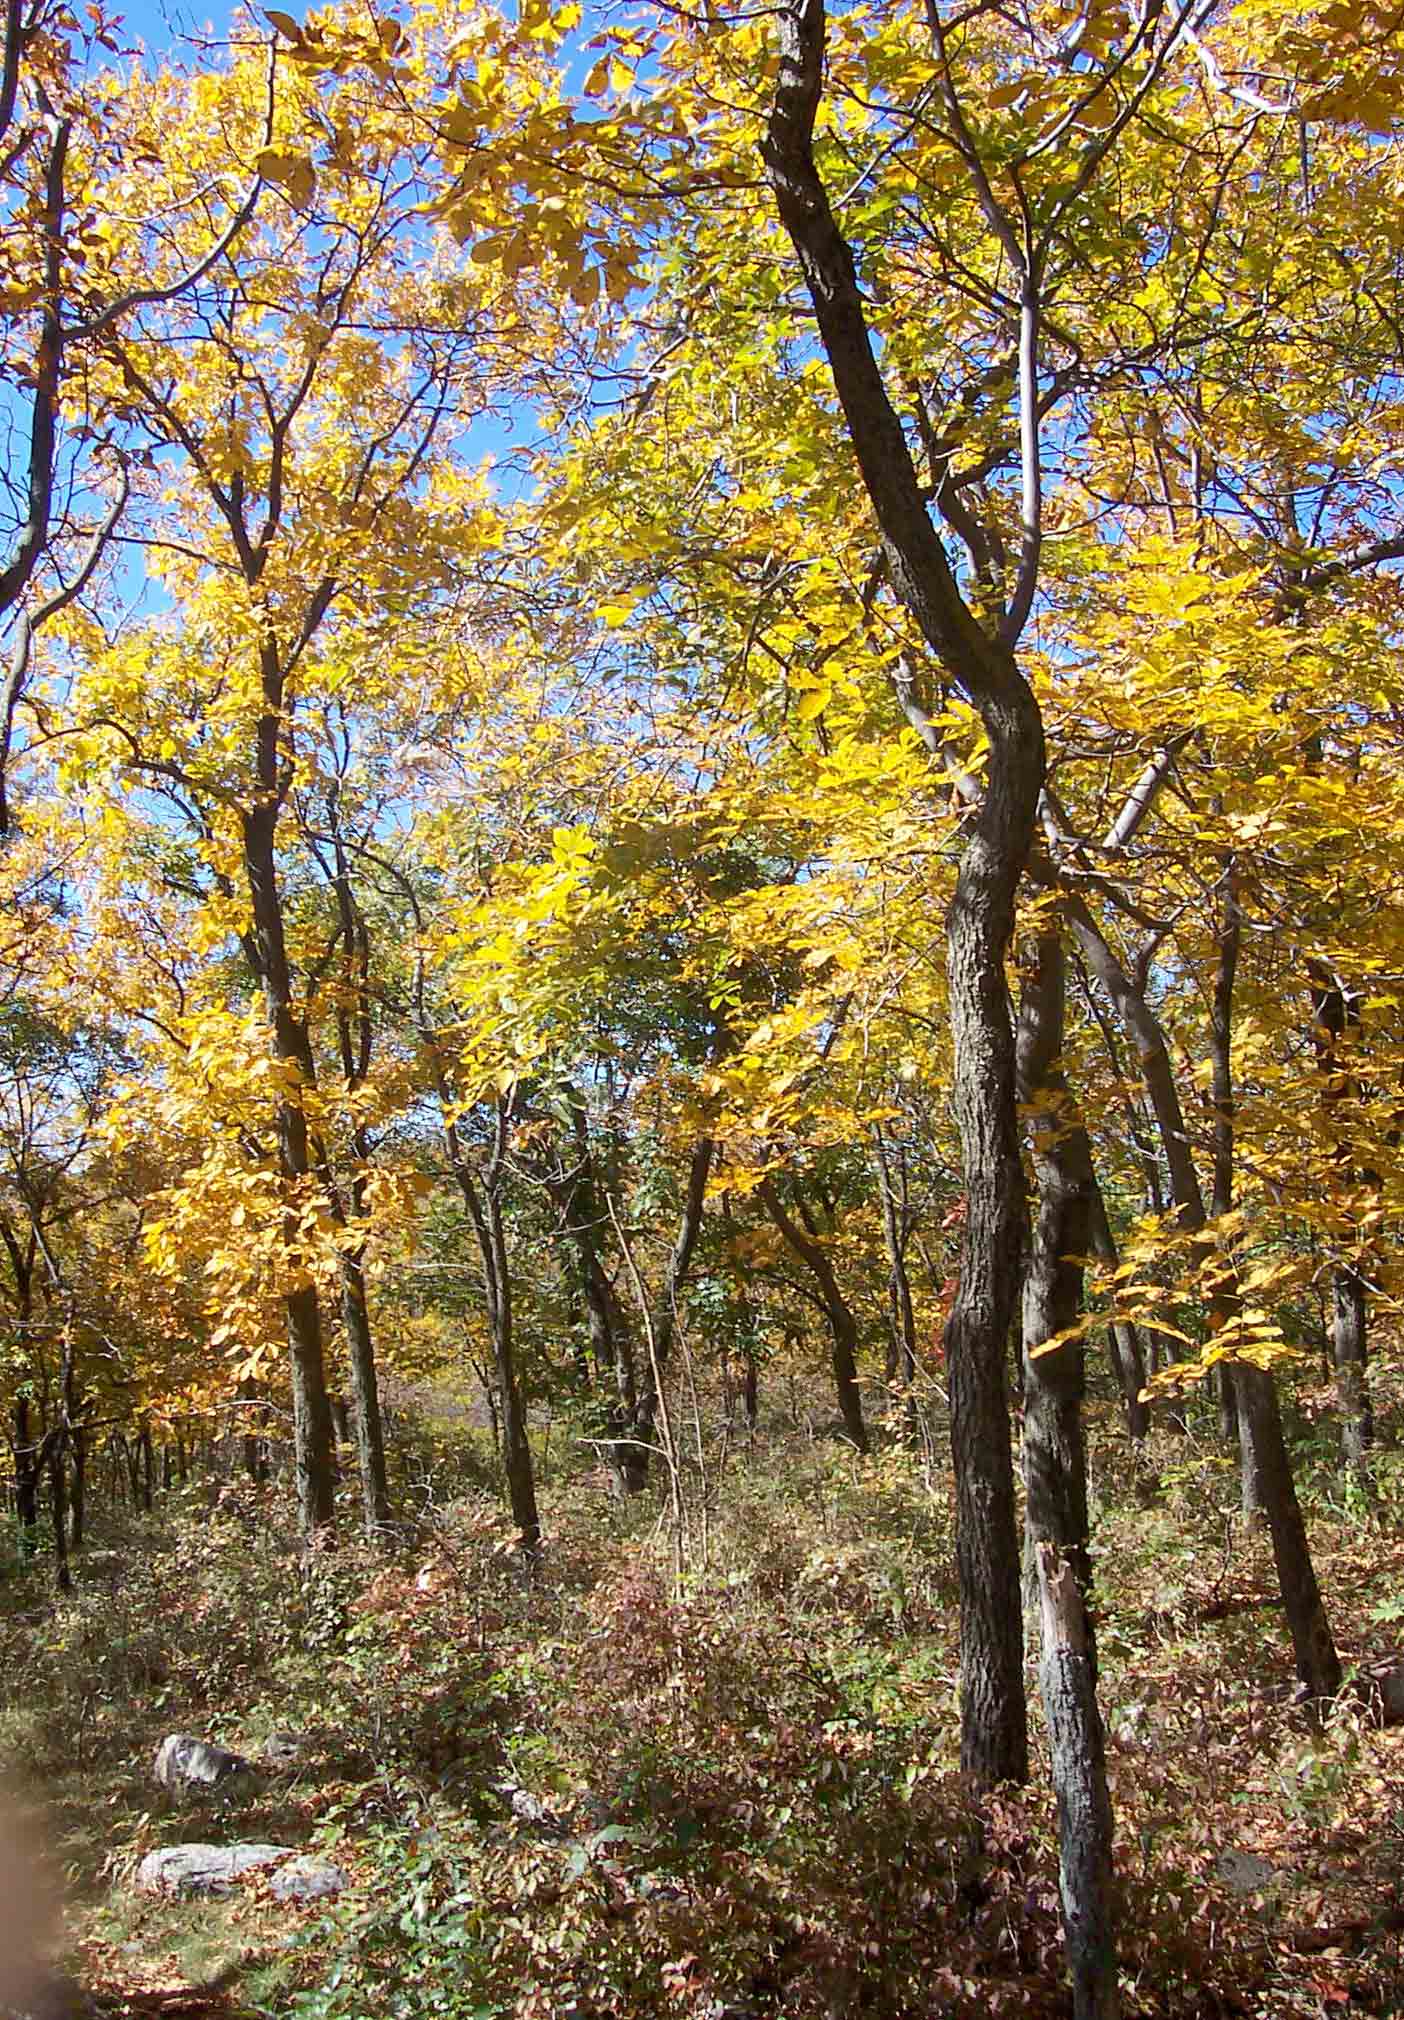 Some early fall color just south of Tott's Gap. Taken at approximately mm 5.0.  Courtesy dlcul@conncoll.edu